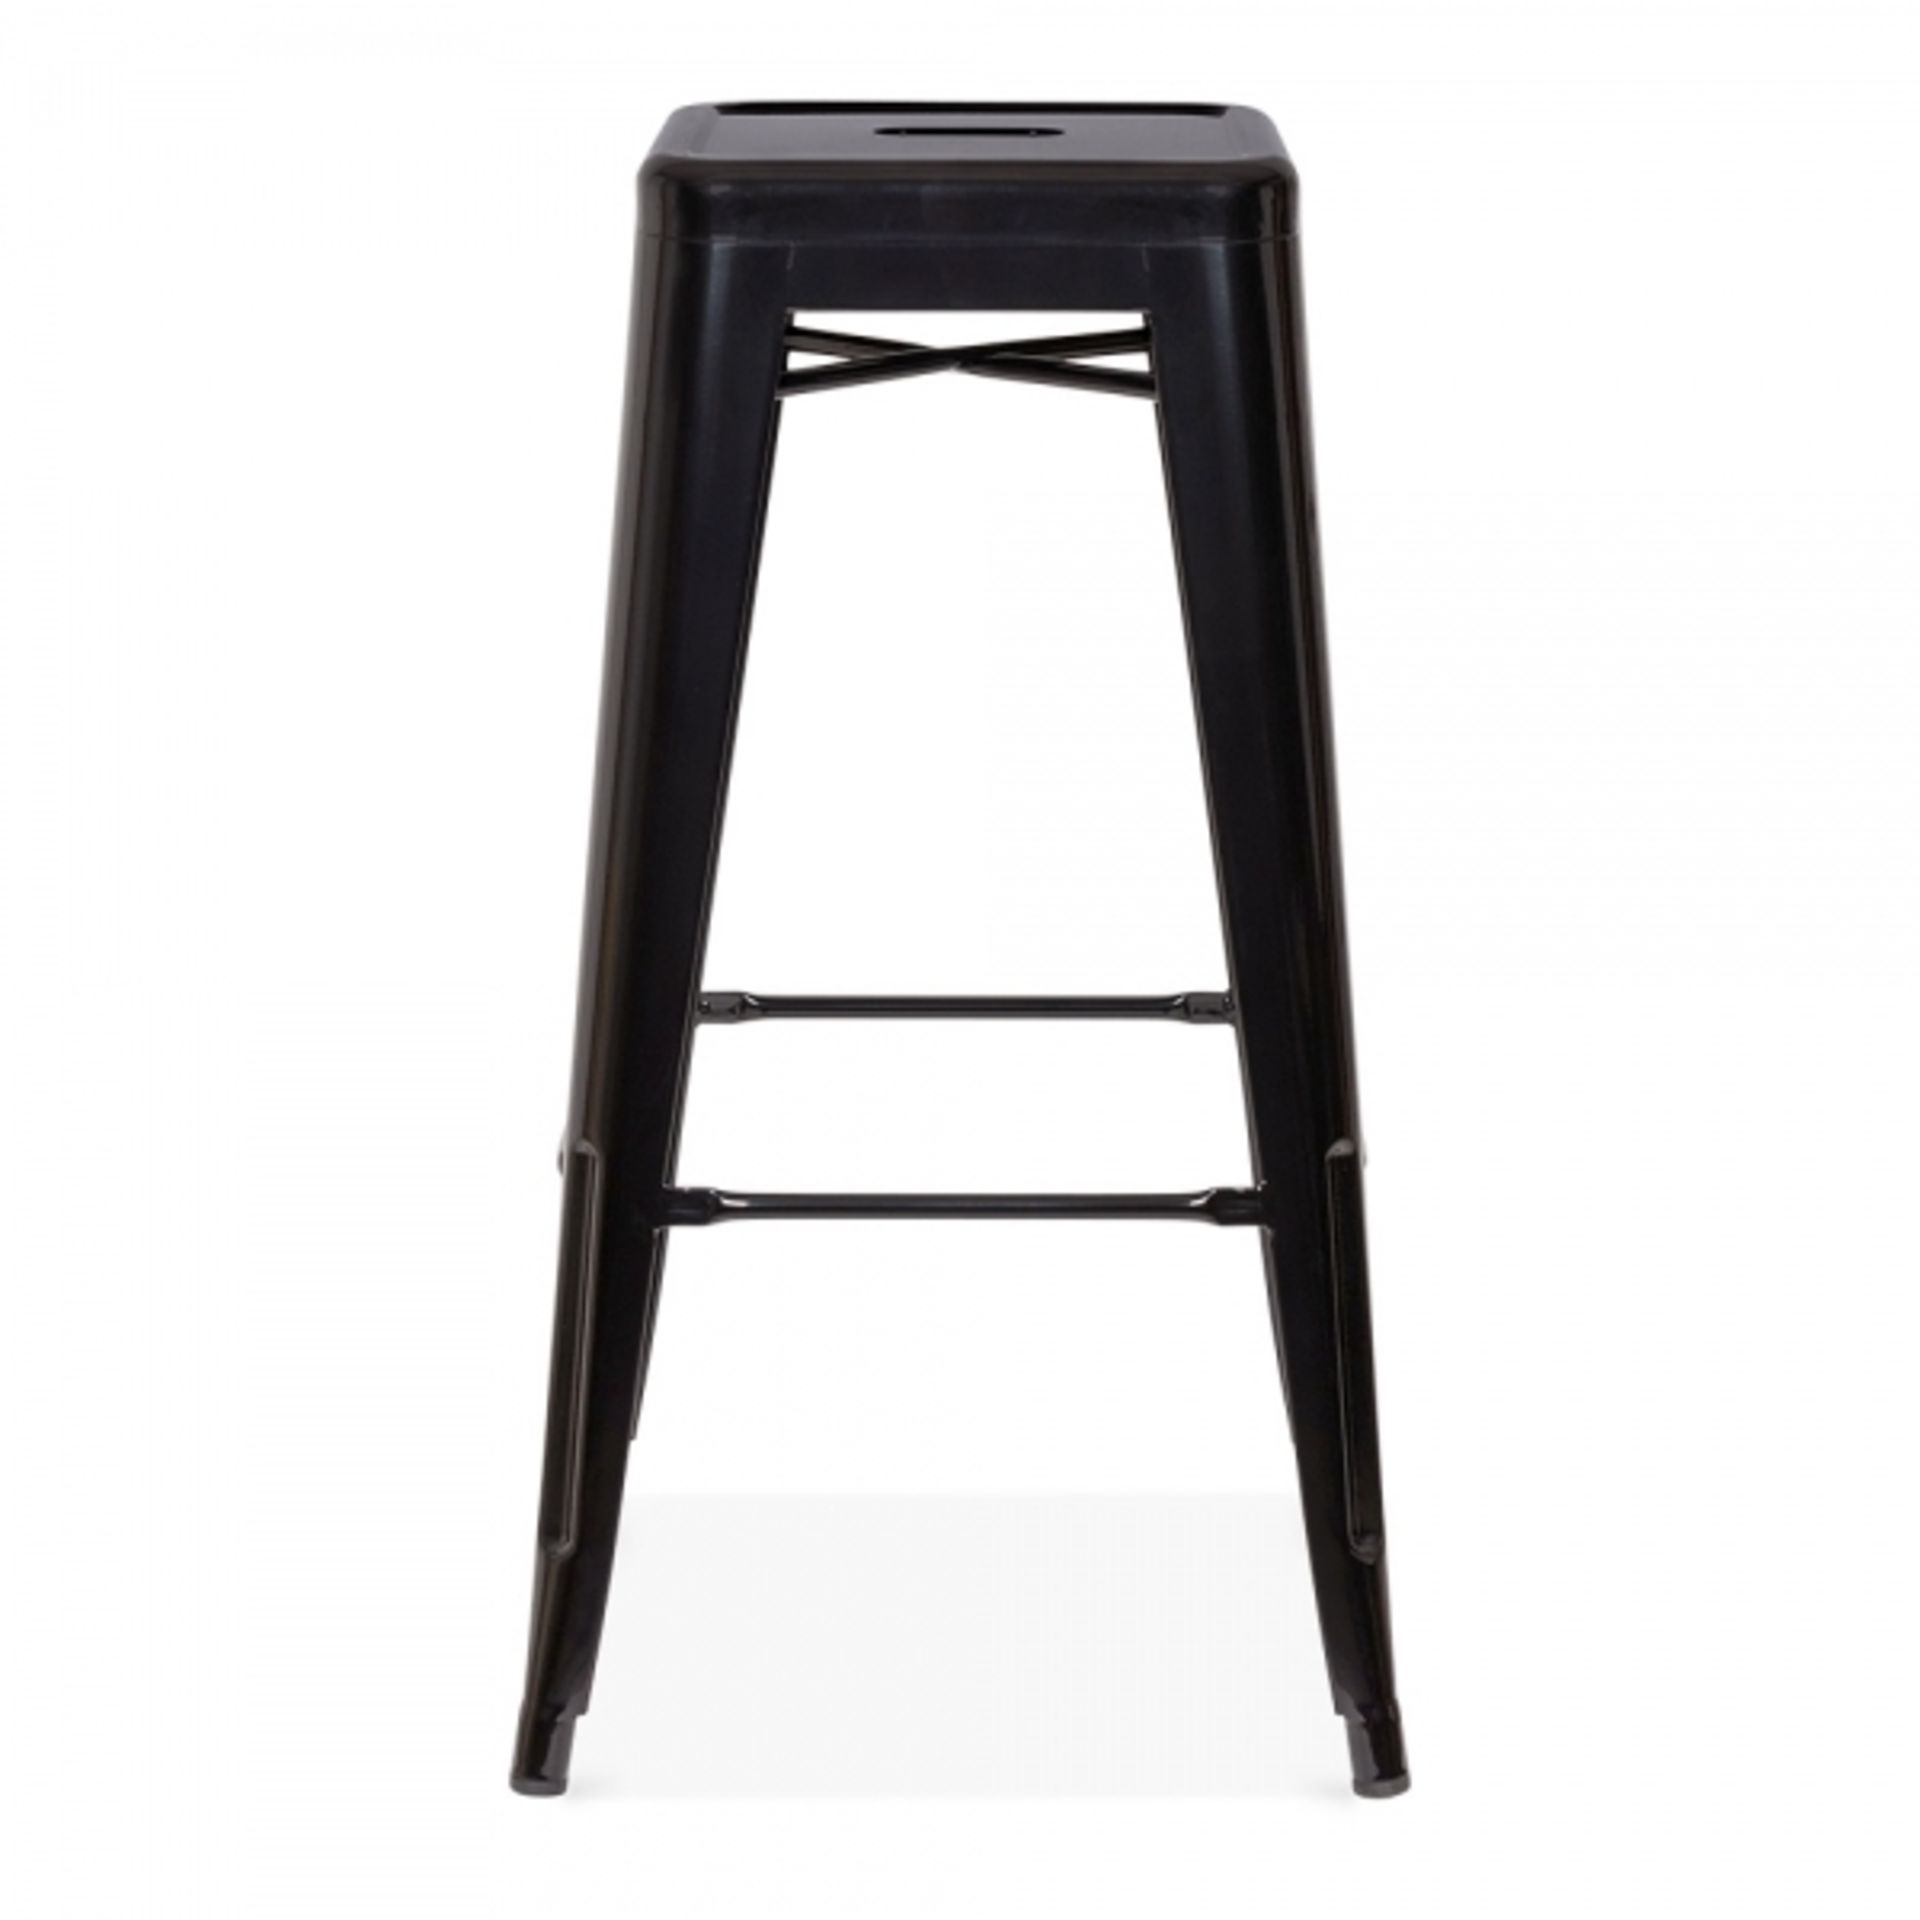 2 x Xavier Pauchard Inspired Industrial Black Bar Stools - Pair of - Lightweight and Stackable - Image 3 of 4